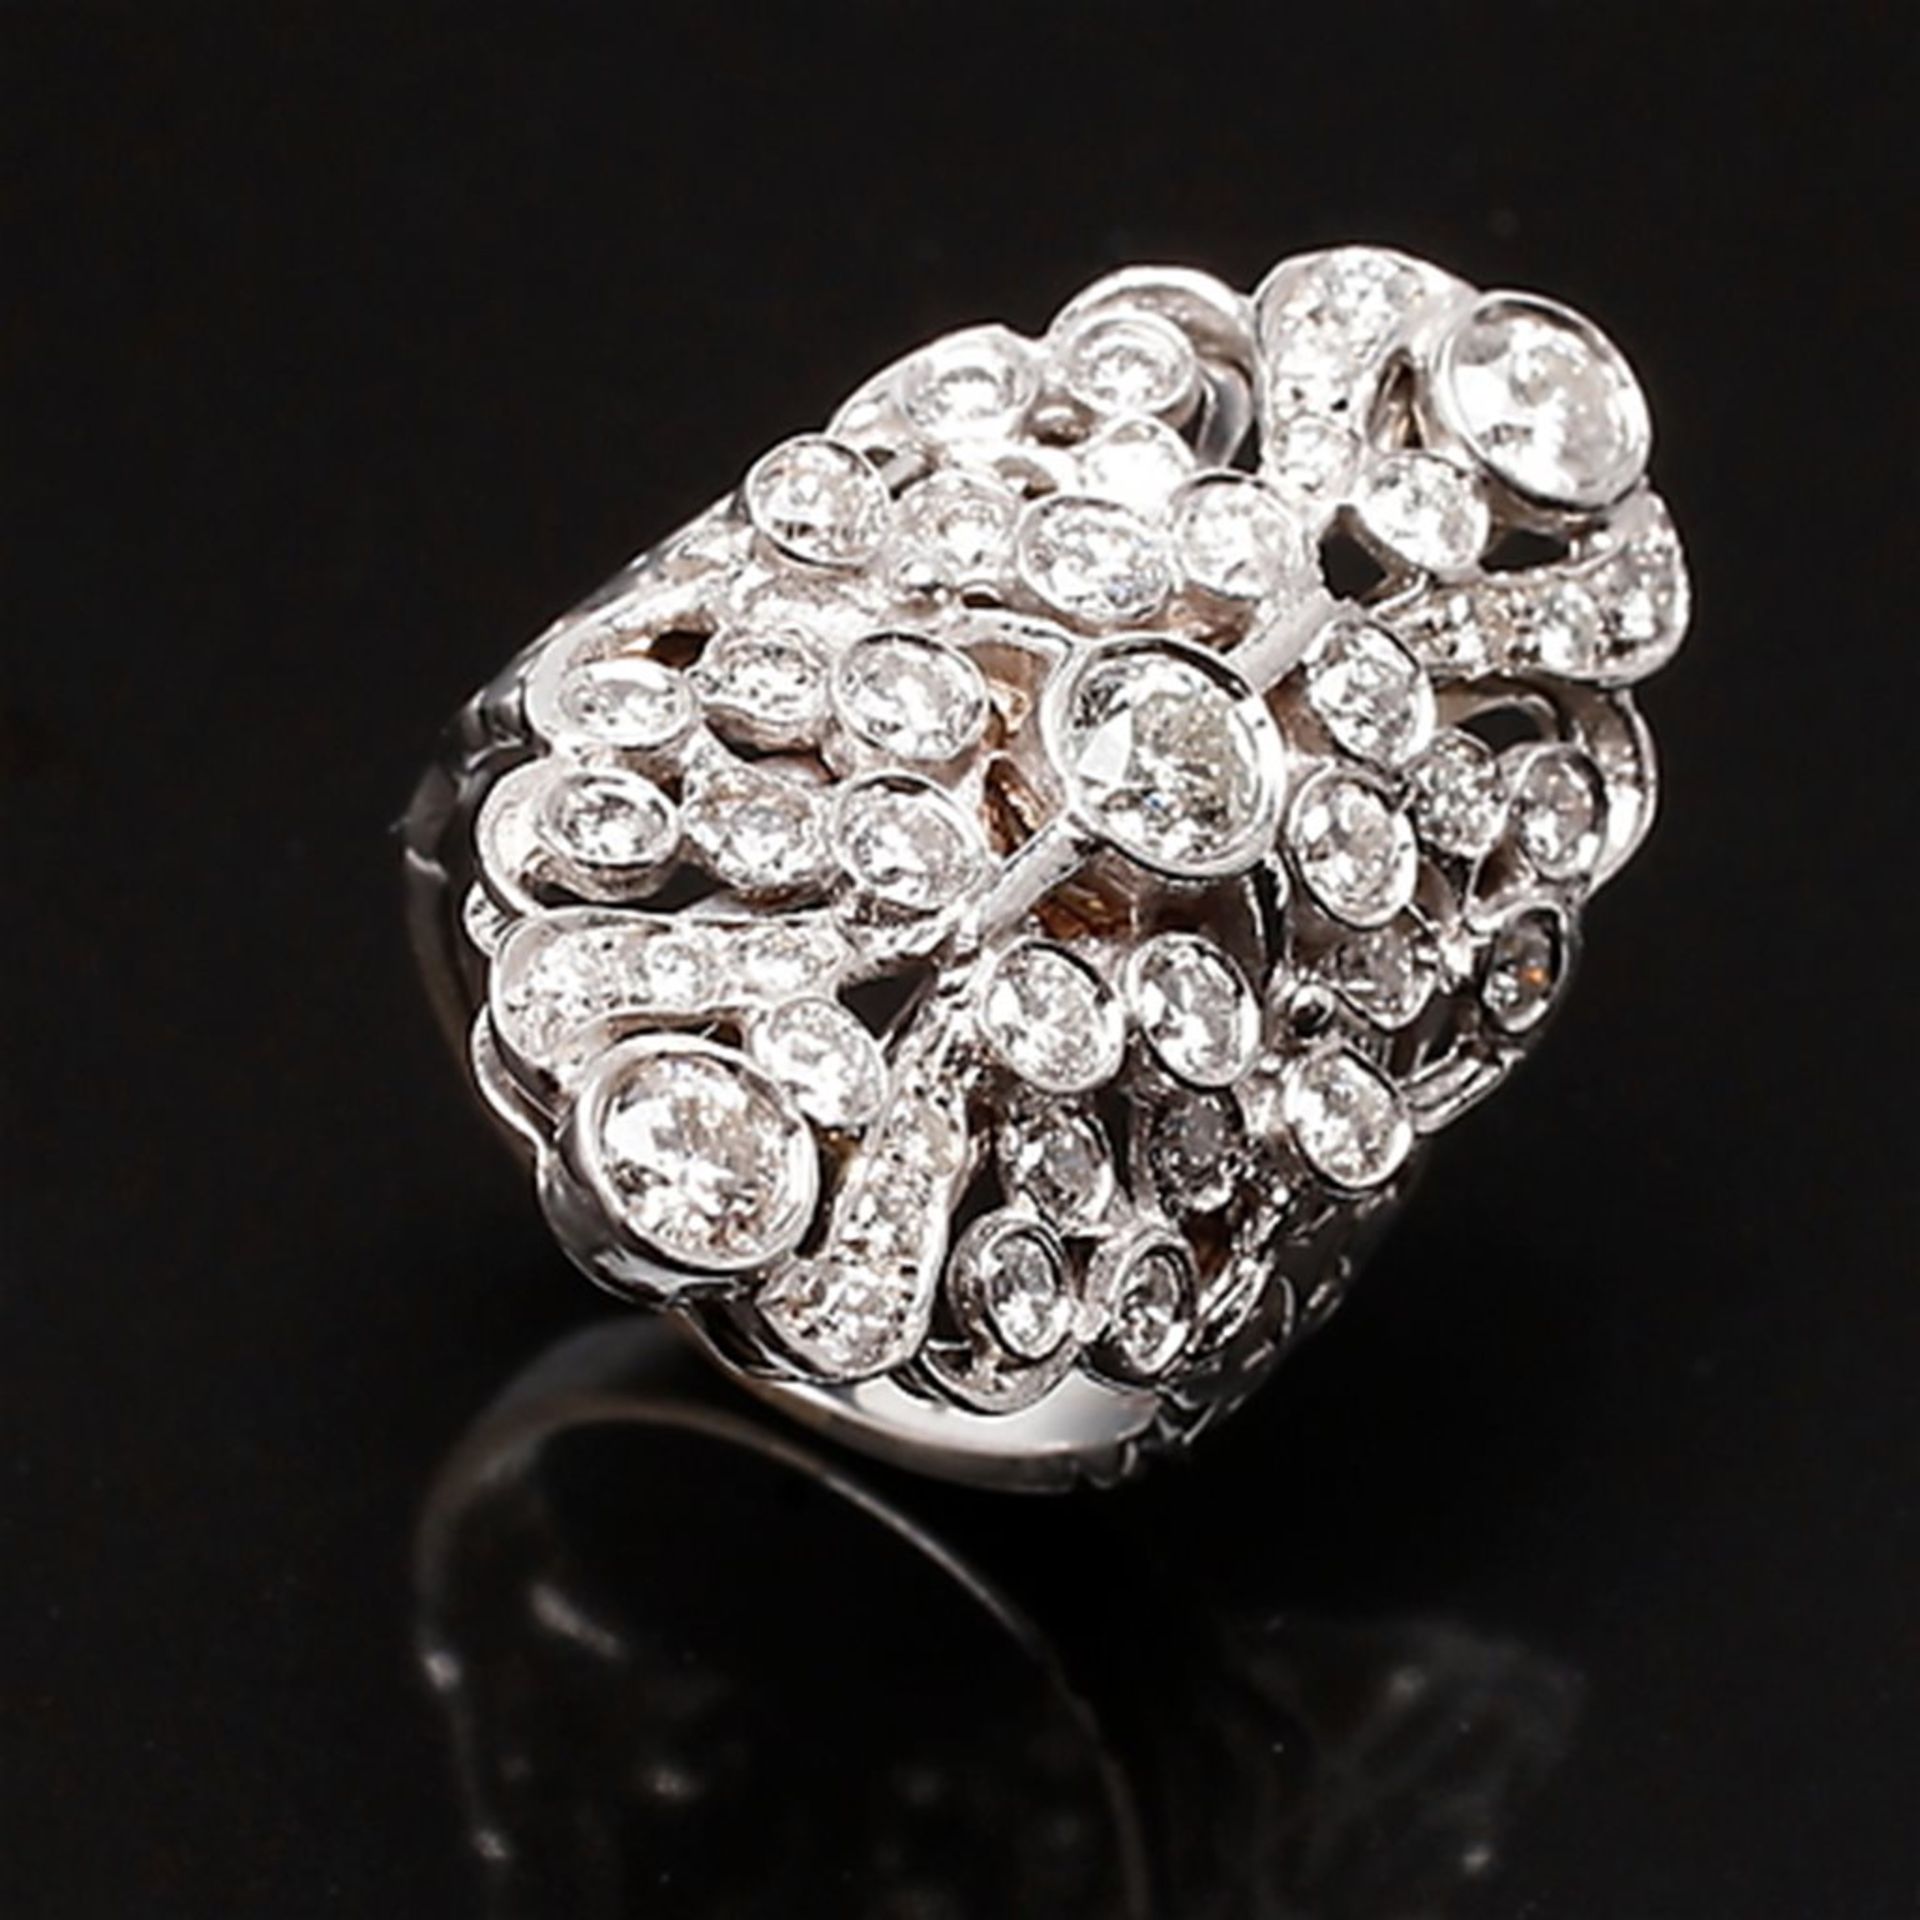 Ring with 42 diamonds